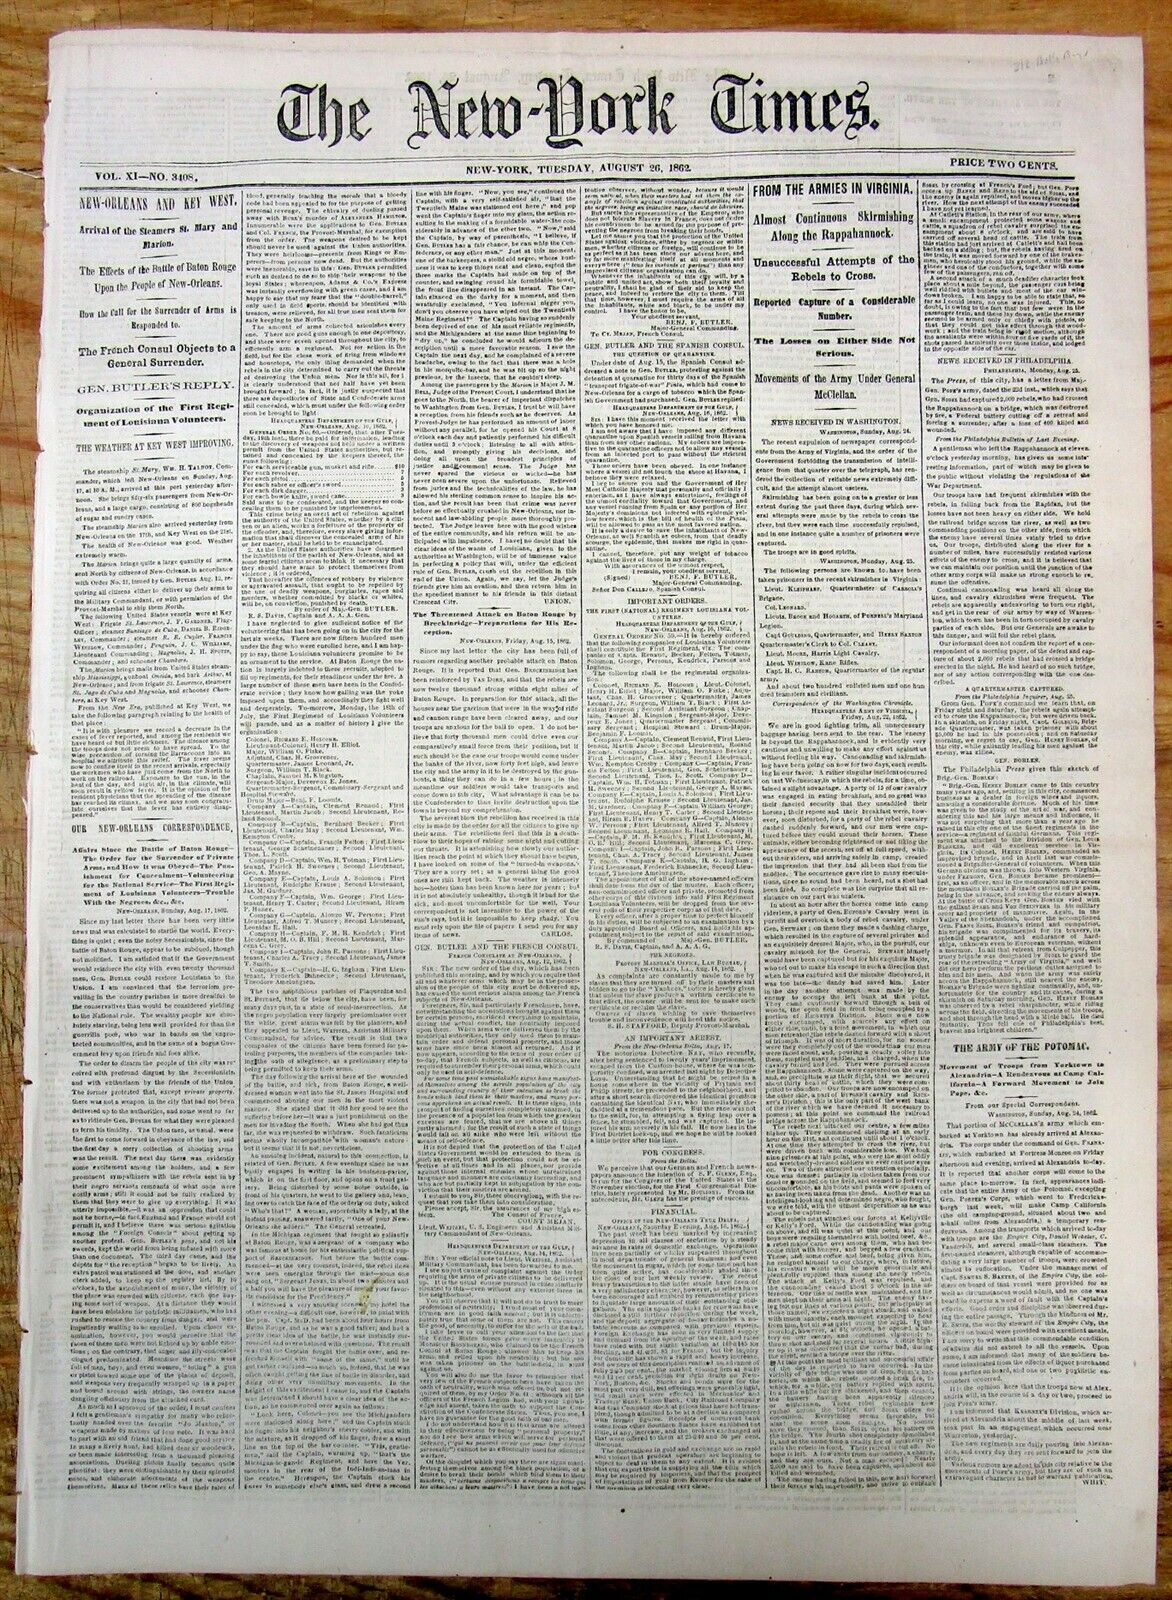 1862 NY Times newspaper with a DESCRIPTION of female CONFEDERATE SPY BELLE BOYD